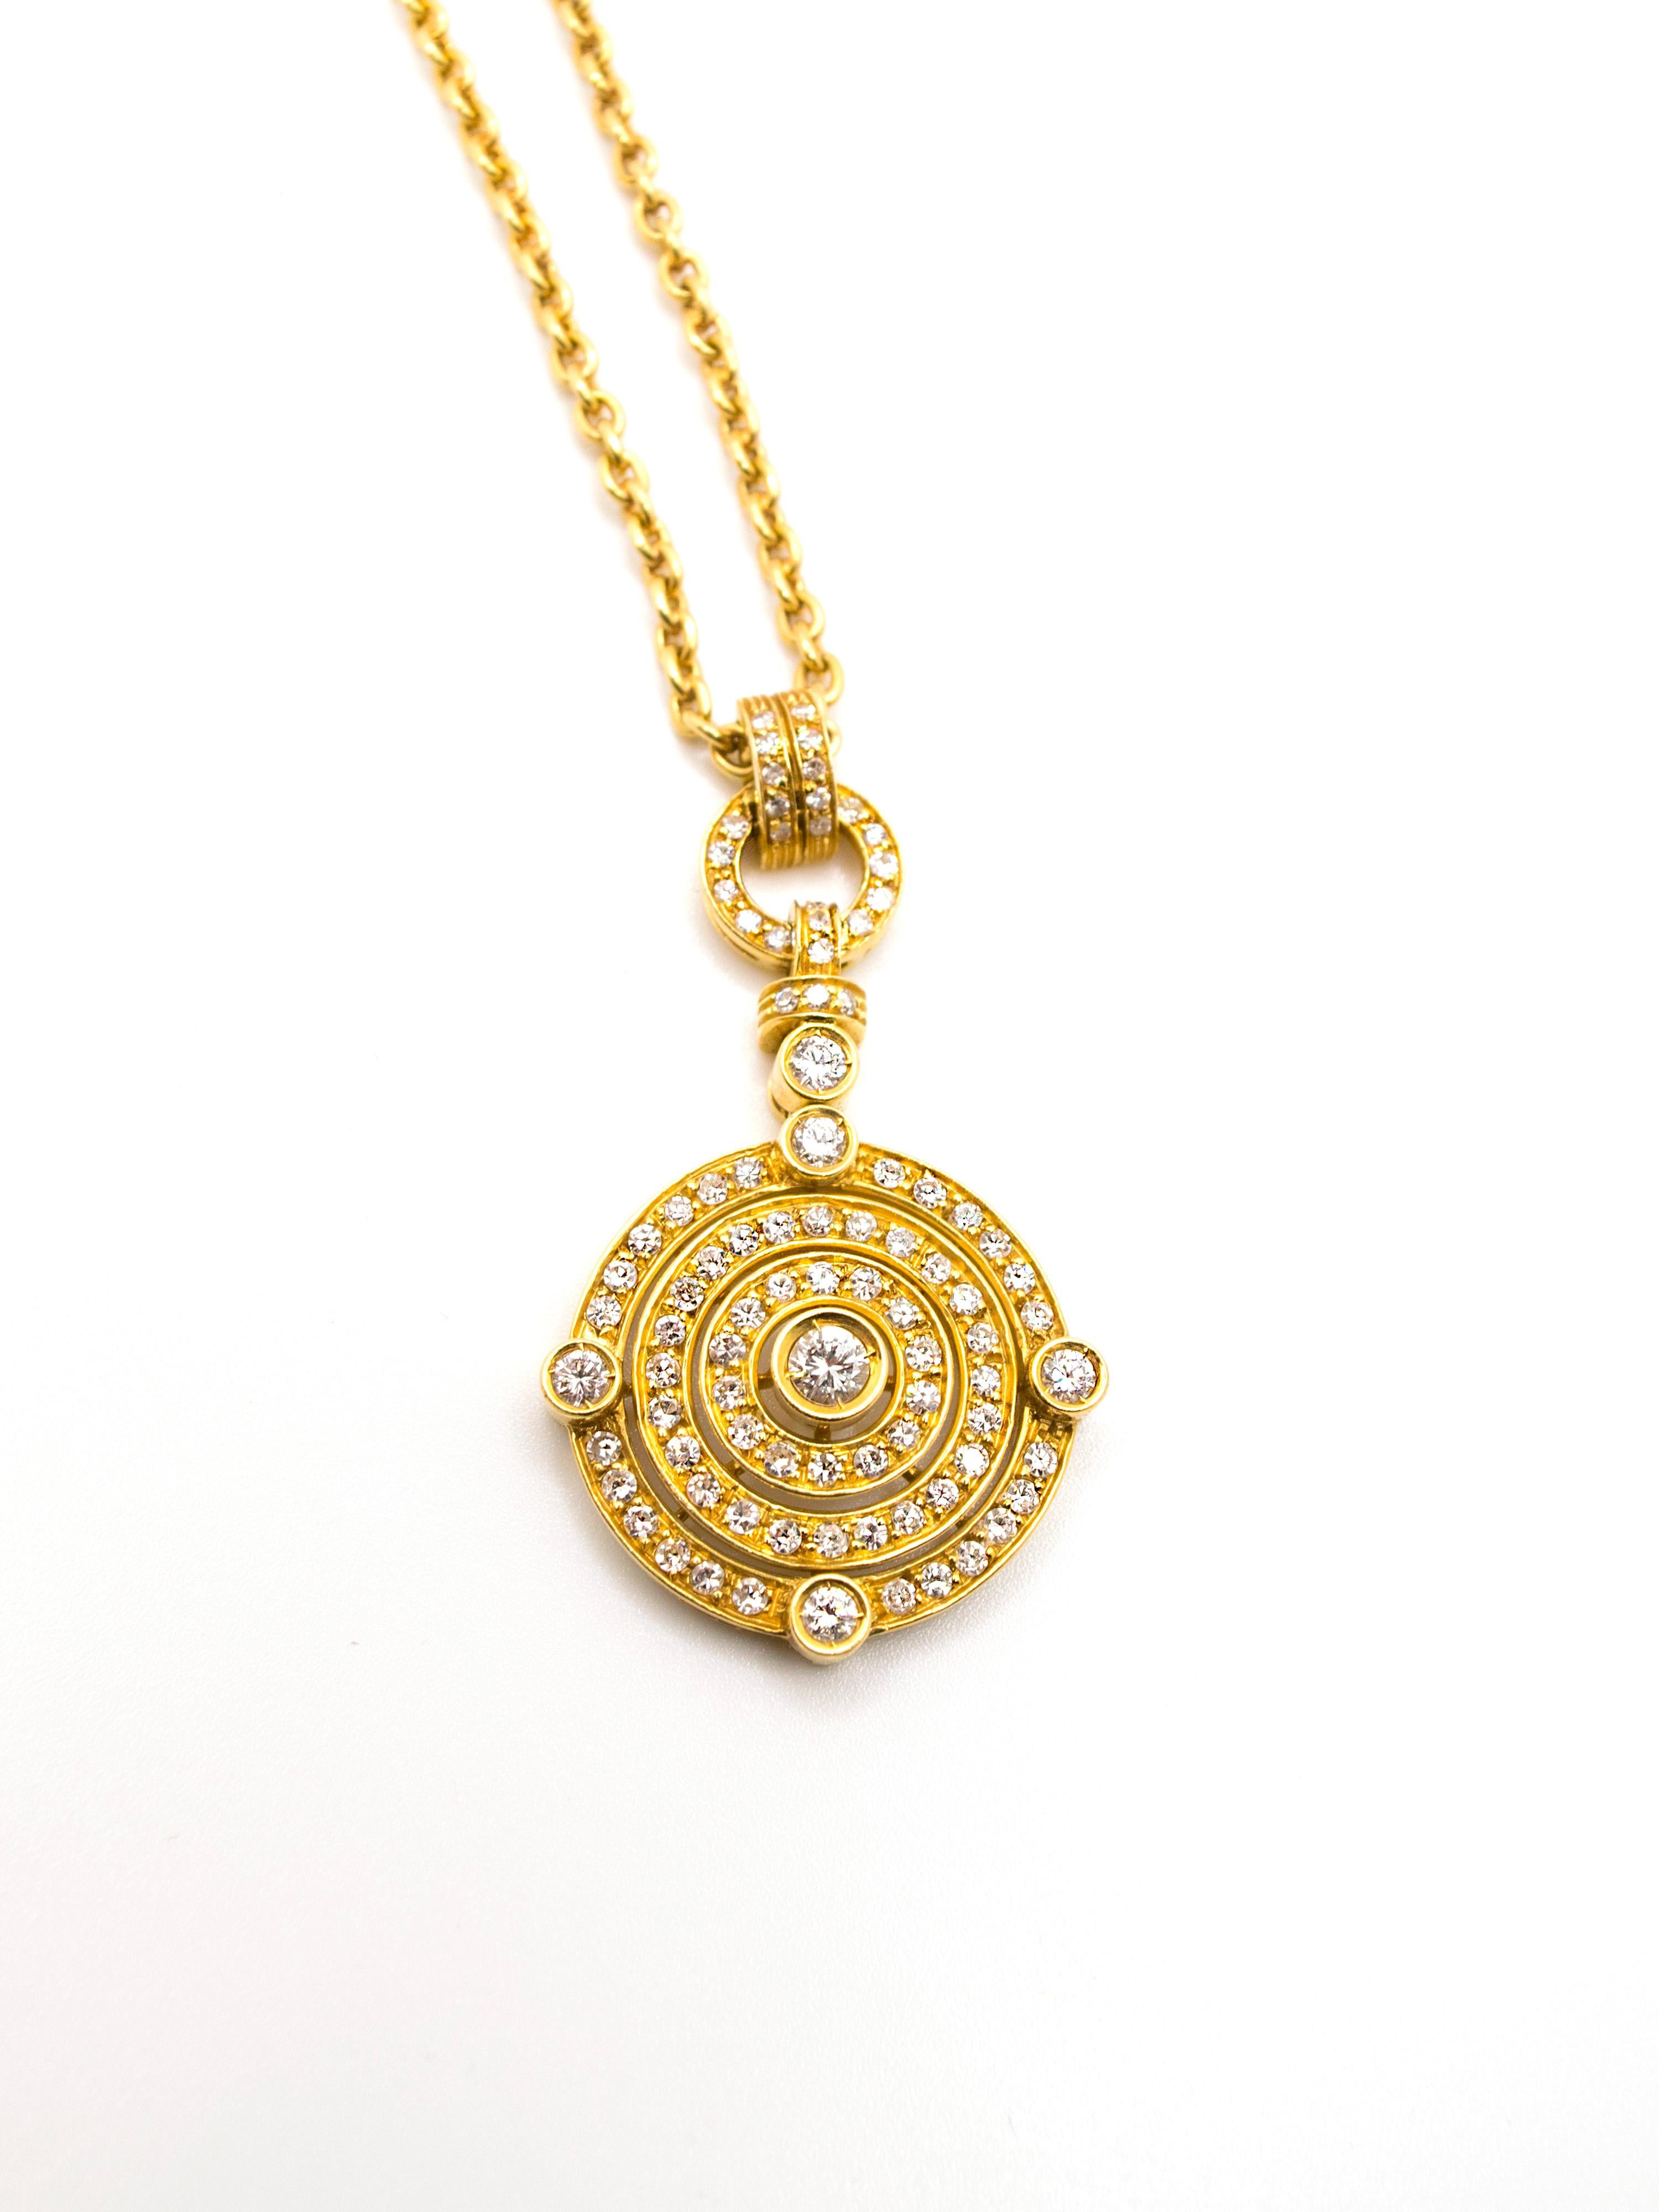 Art Decò inspired necklace is made in 18 Kt yellow gold weighing in total gr. 21.55.
The charm is embellished with six bigger diamonds ( Ct 0.50 circa ) and other smaller ones all over the surface.
The charm has a diameter of cm 2.35 and a length of